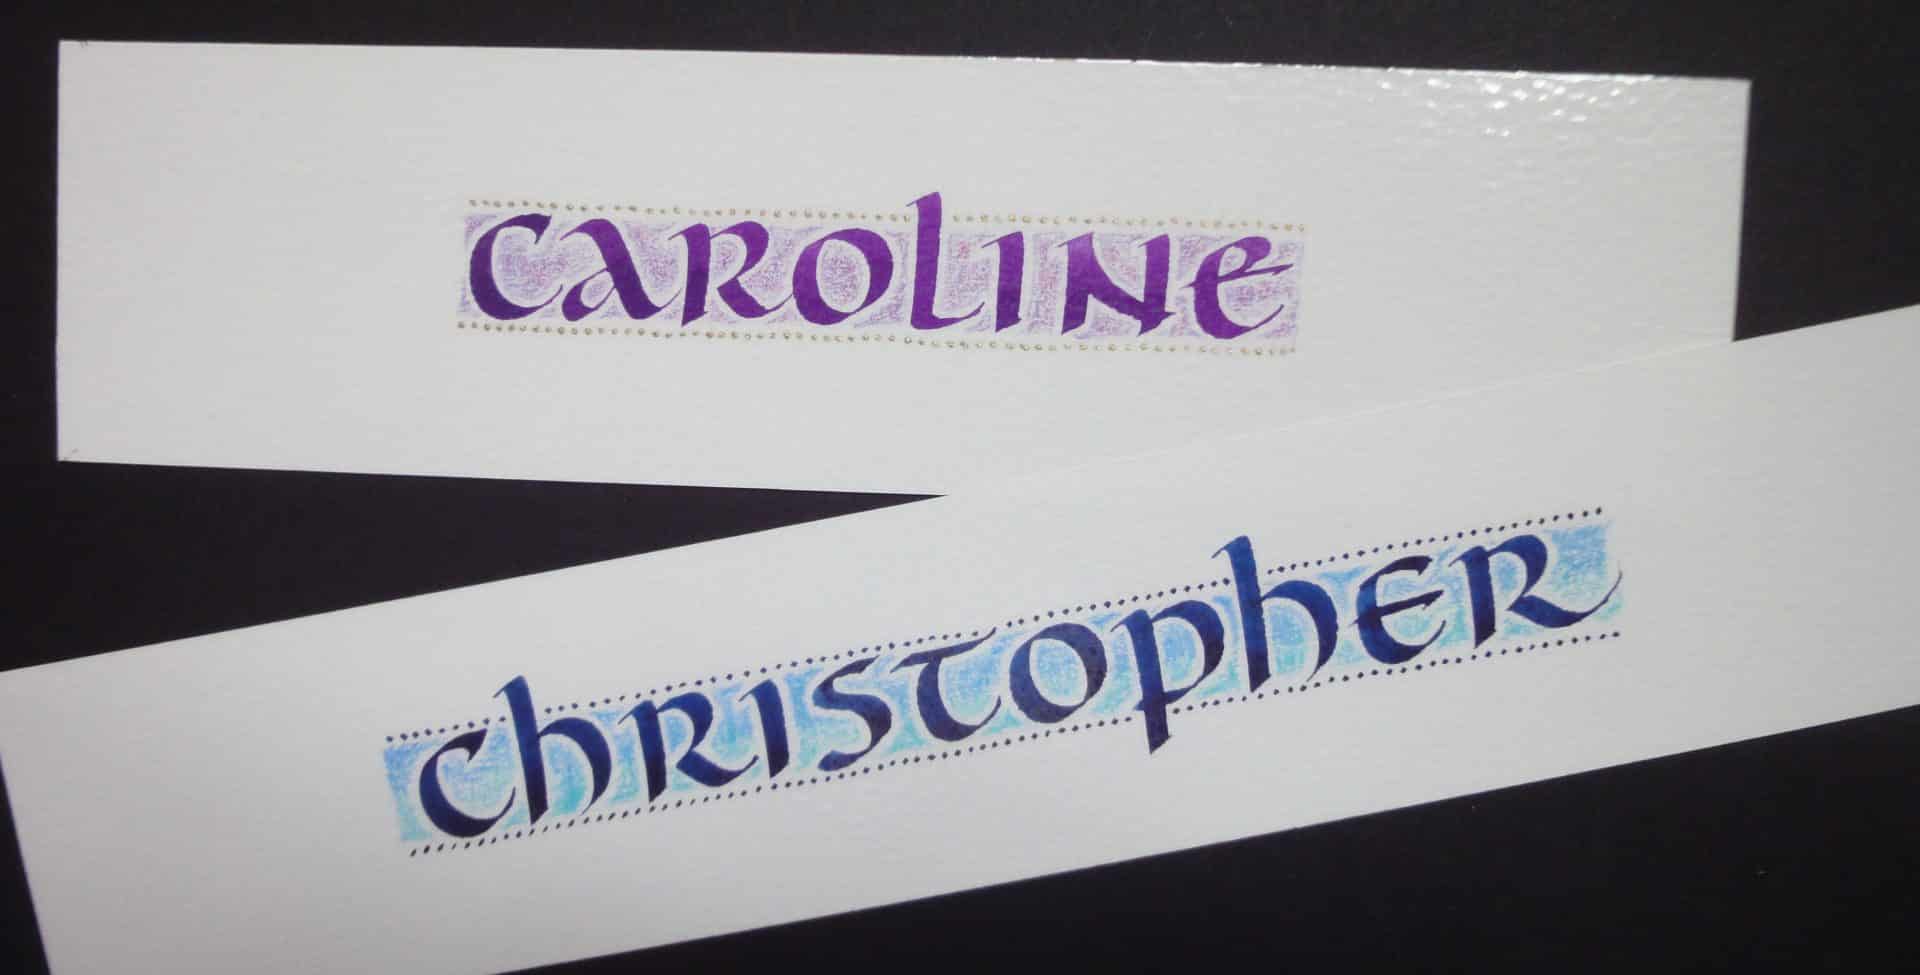 Image of two bookmarks with two names (Caroline and Christopher) in Calligraphic writing in Purple and Blue